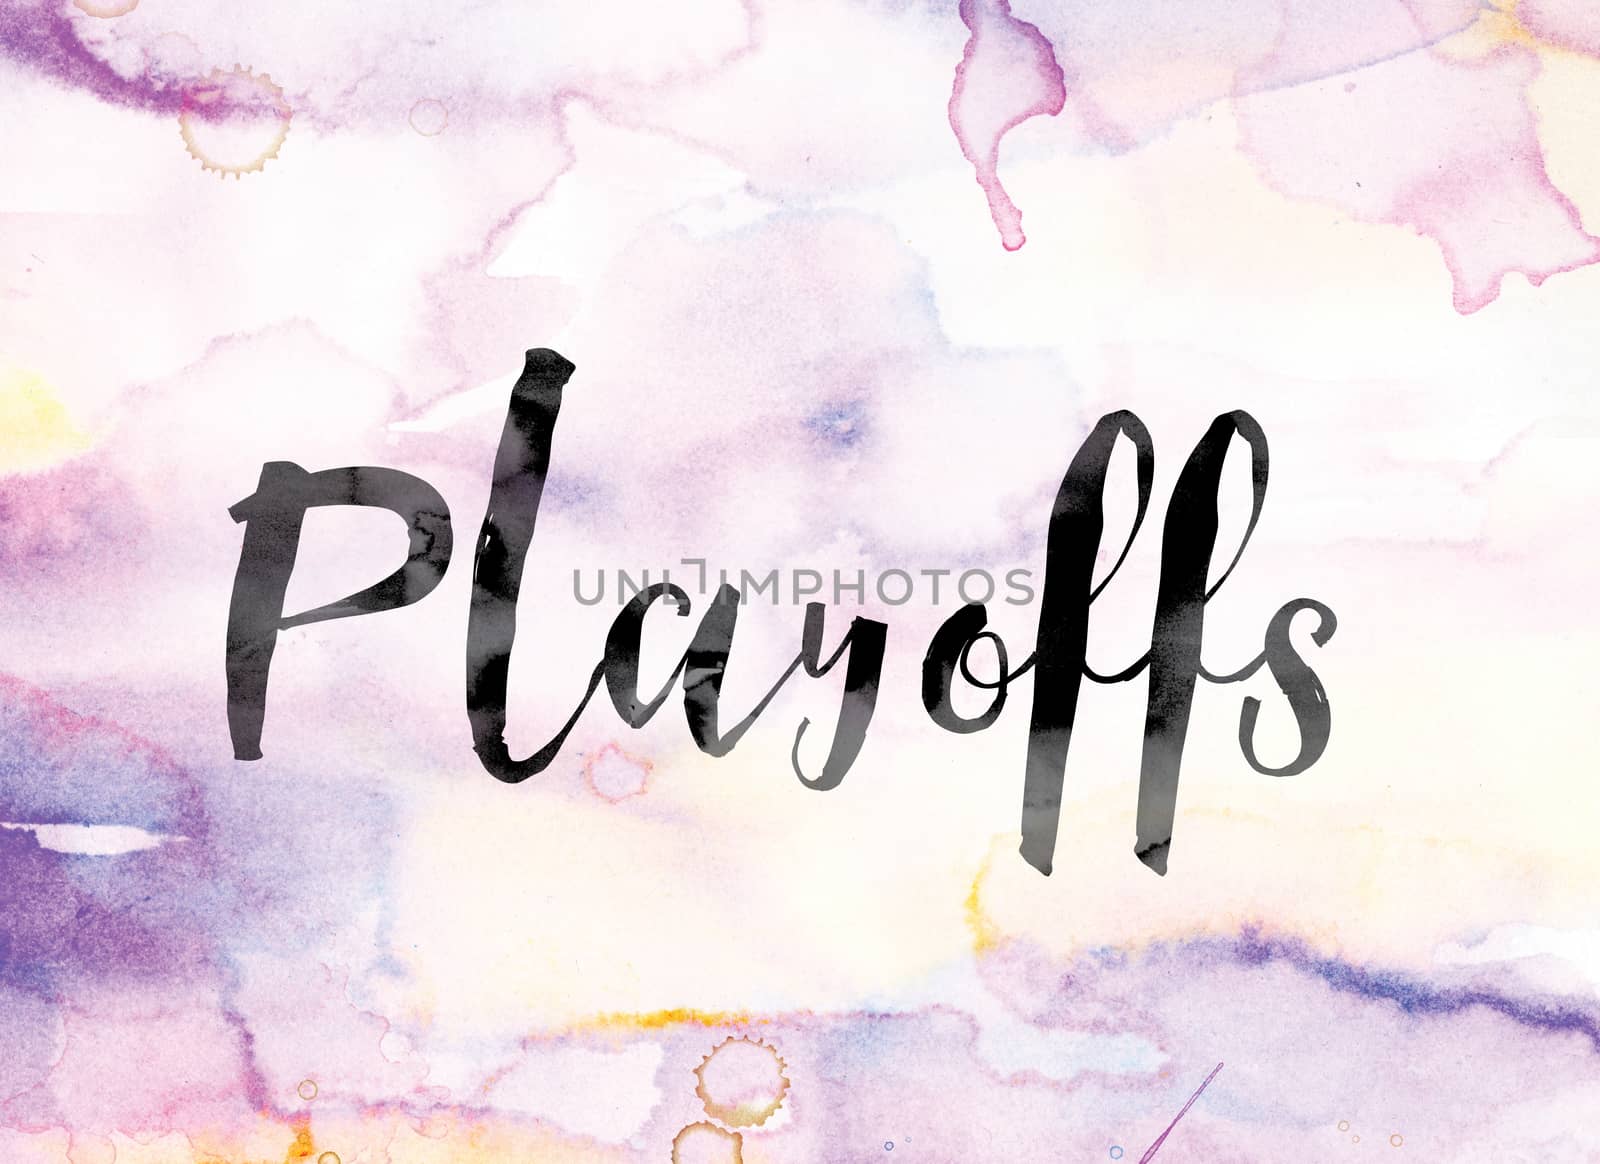 The word "Playoffs" painted in black ink over a colorful watercolor washed background concept and theme.